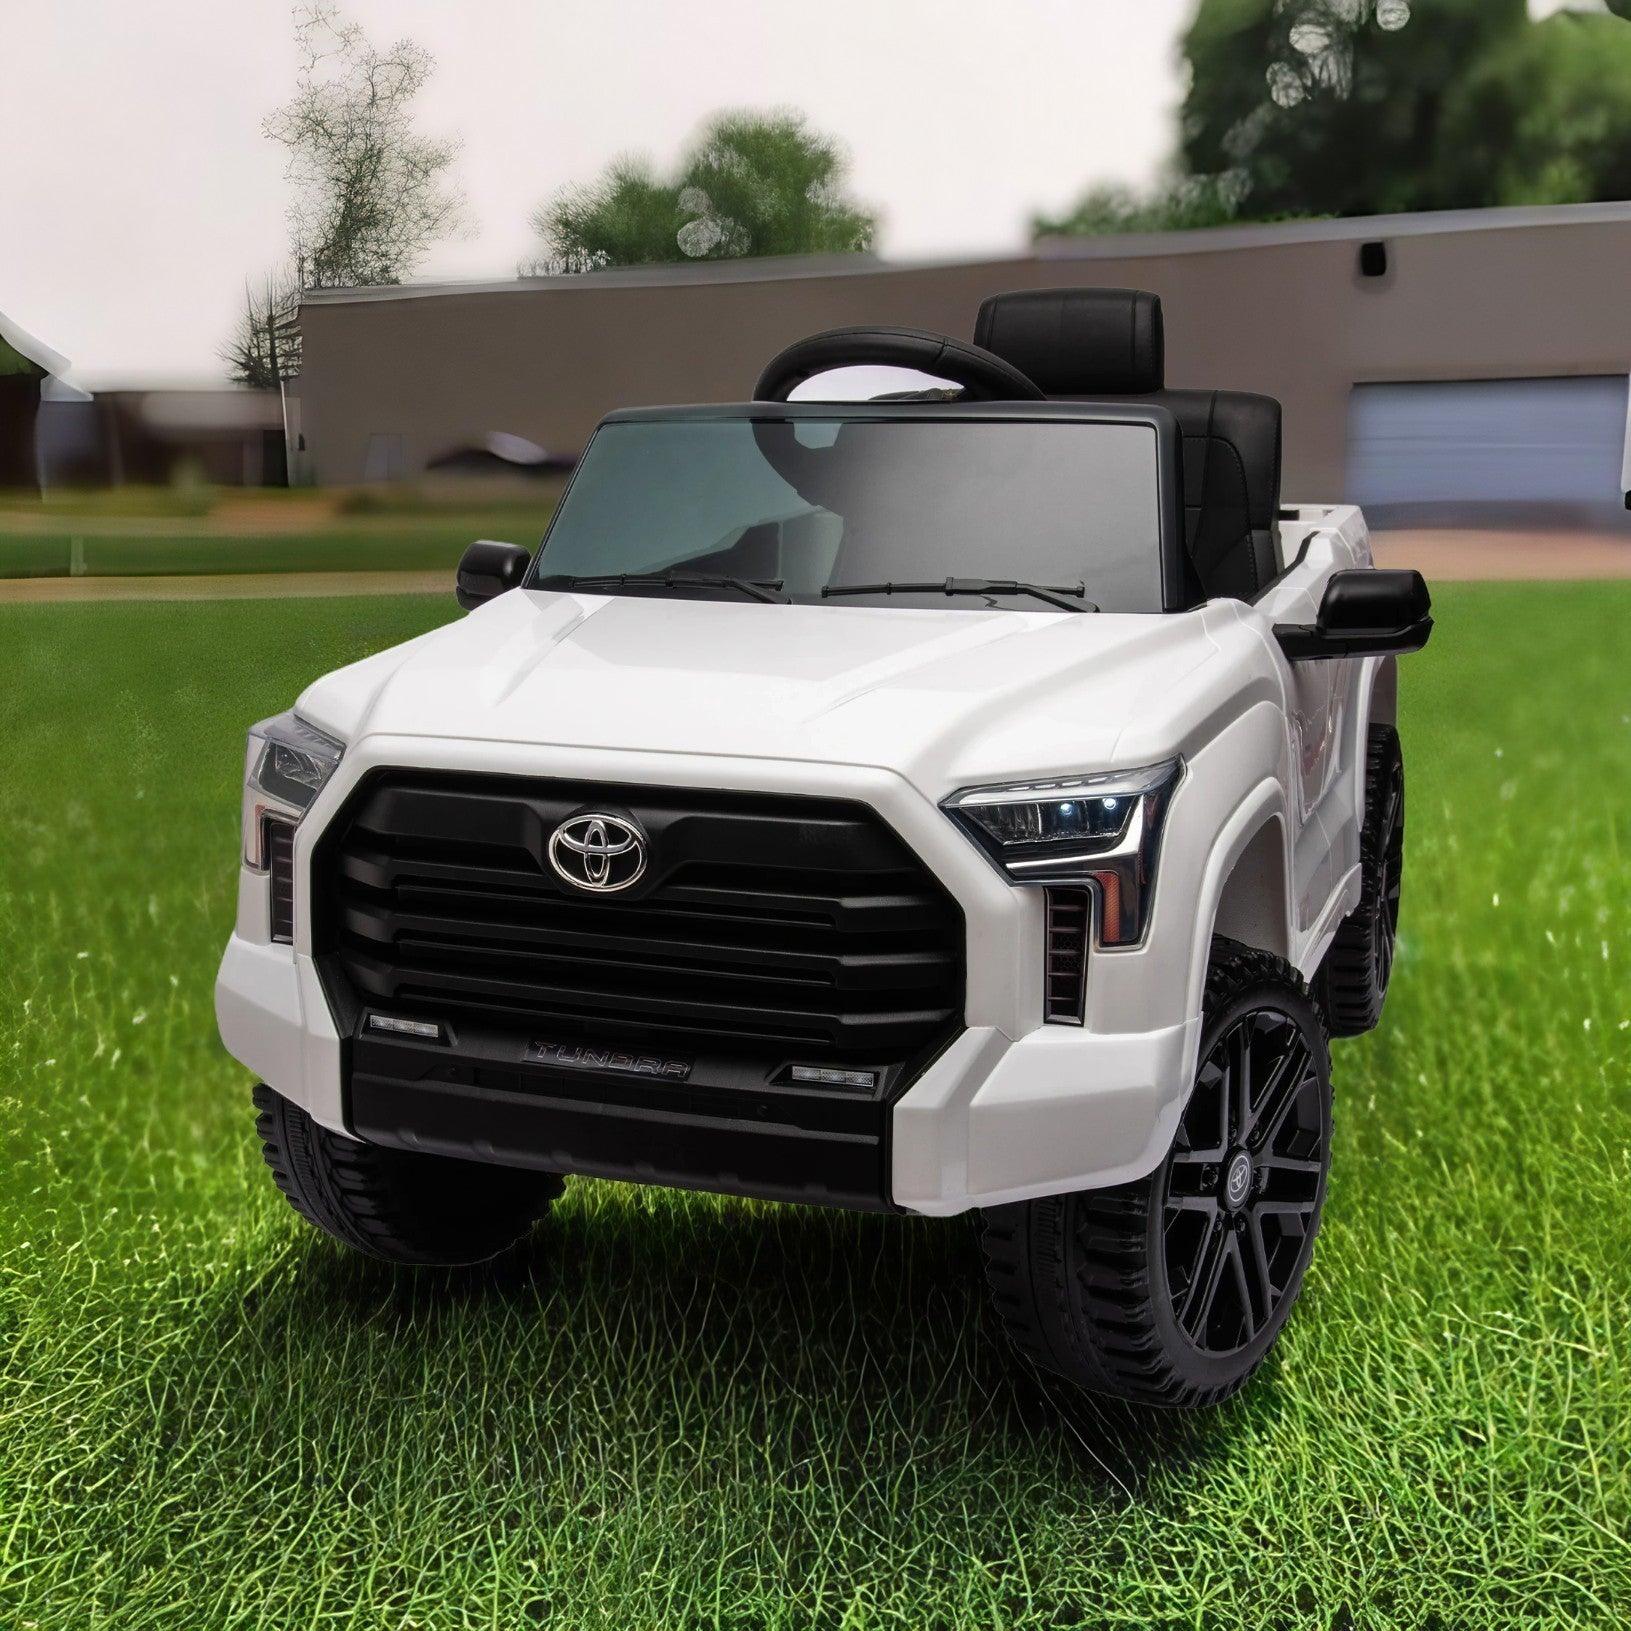 🆓🚛 Officially Licensed Toyota Tundra Pickup, Electric Pickup Car Ride On for Kid, 12V Electric Ride On Toy, 2.4G W/Parents Remote Control, Electric Car for Kids, Three Speed Adjustable, Power Display